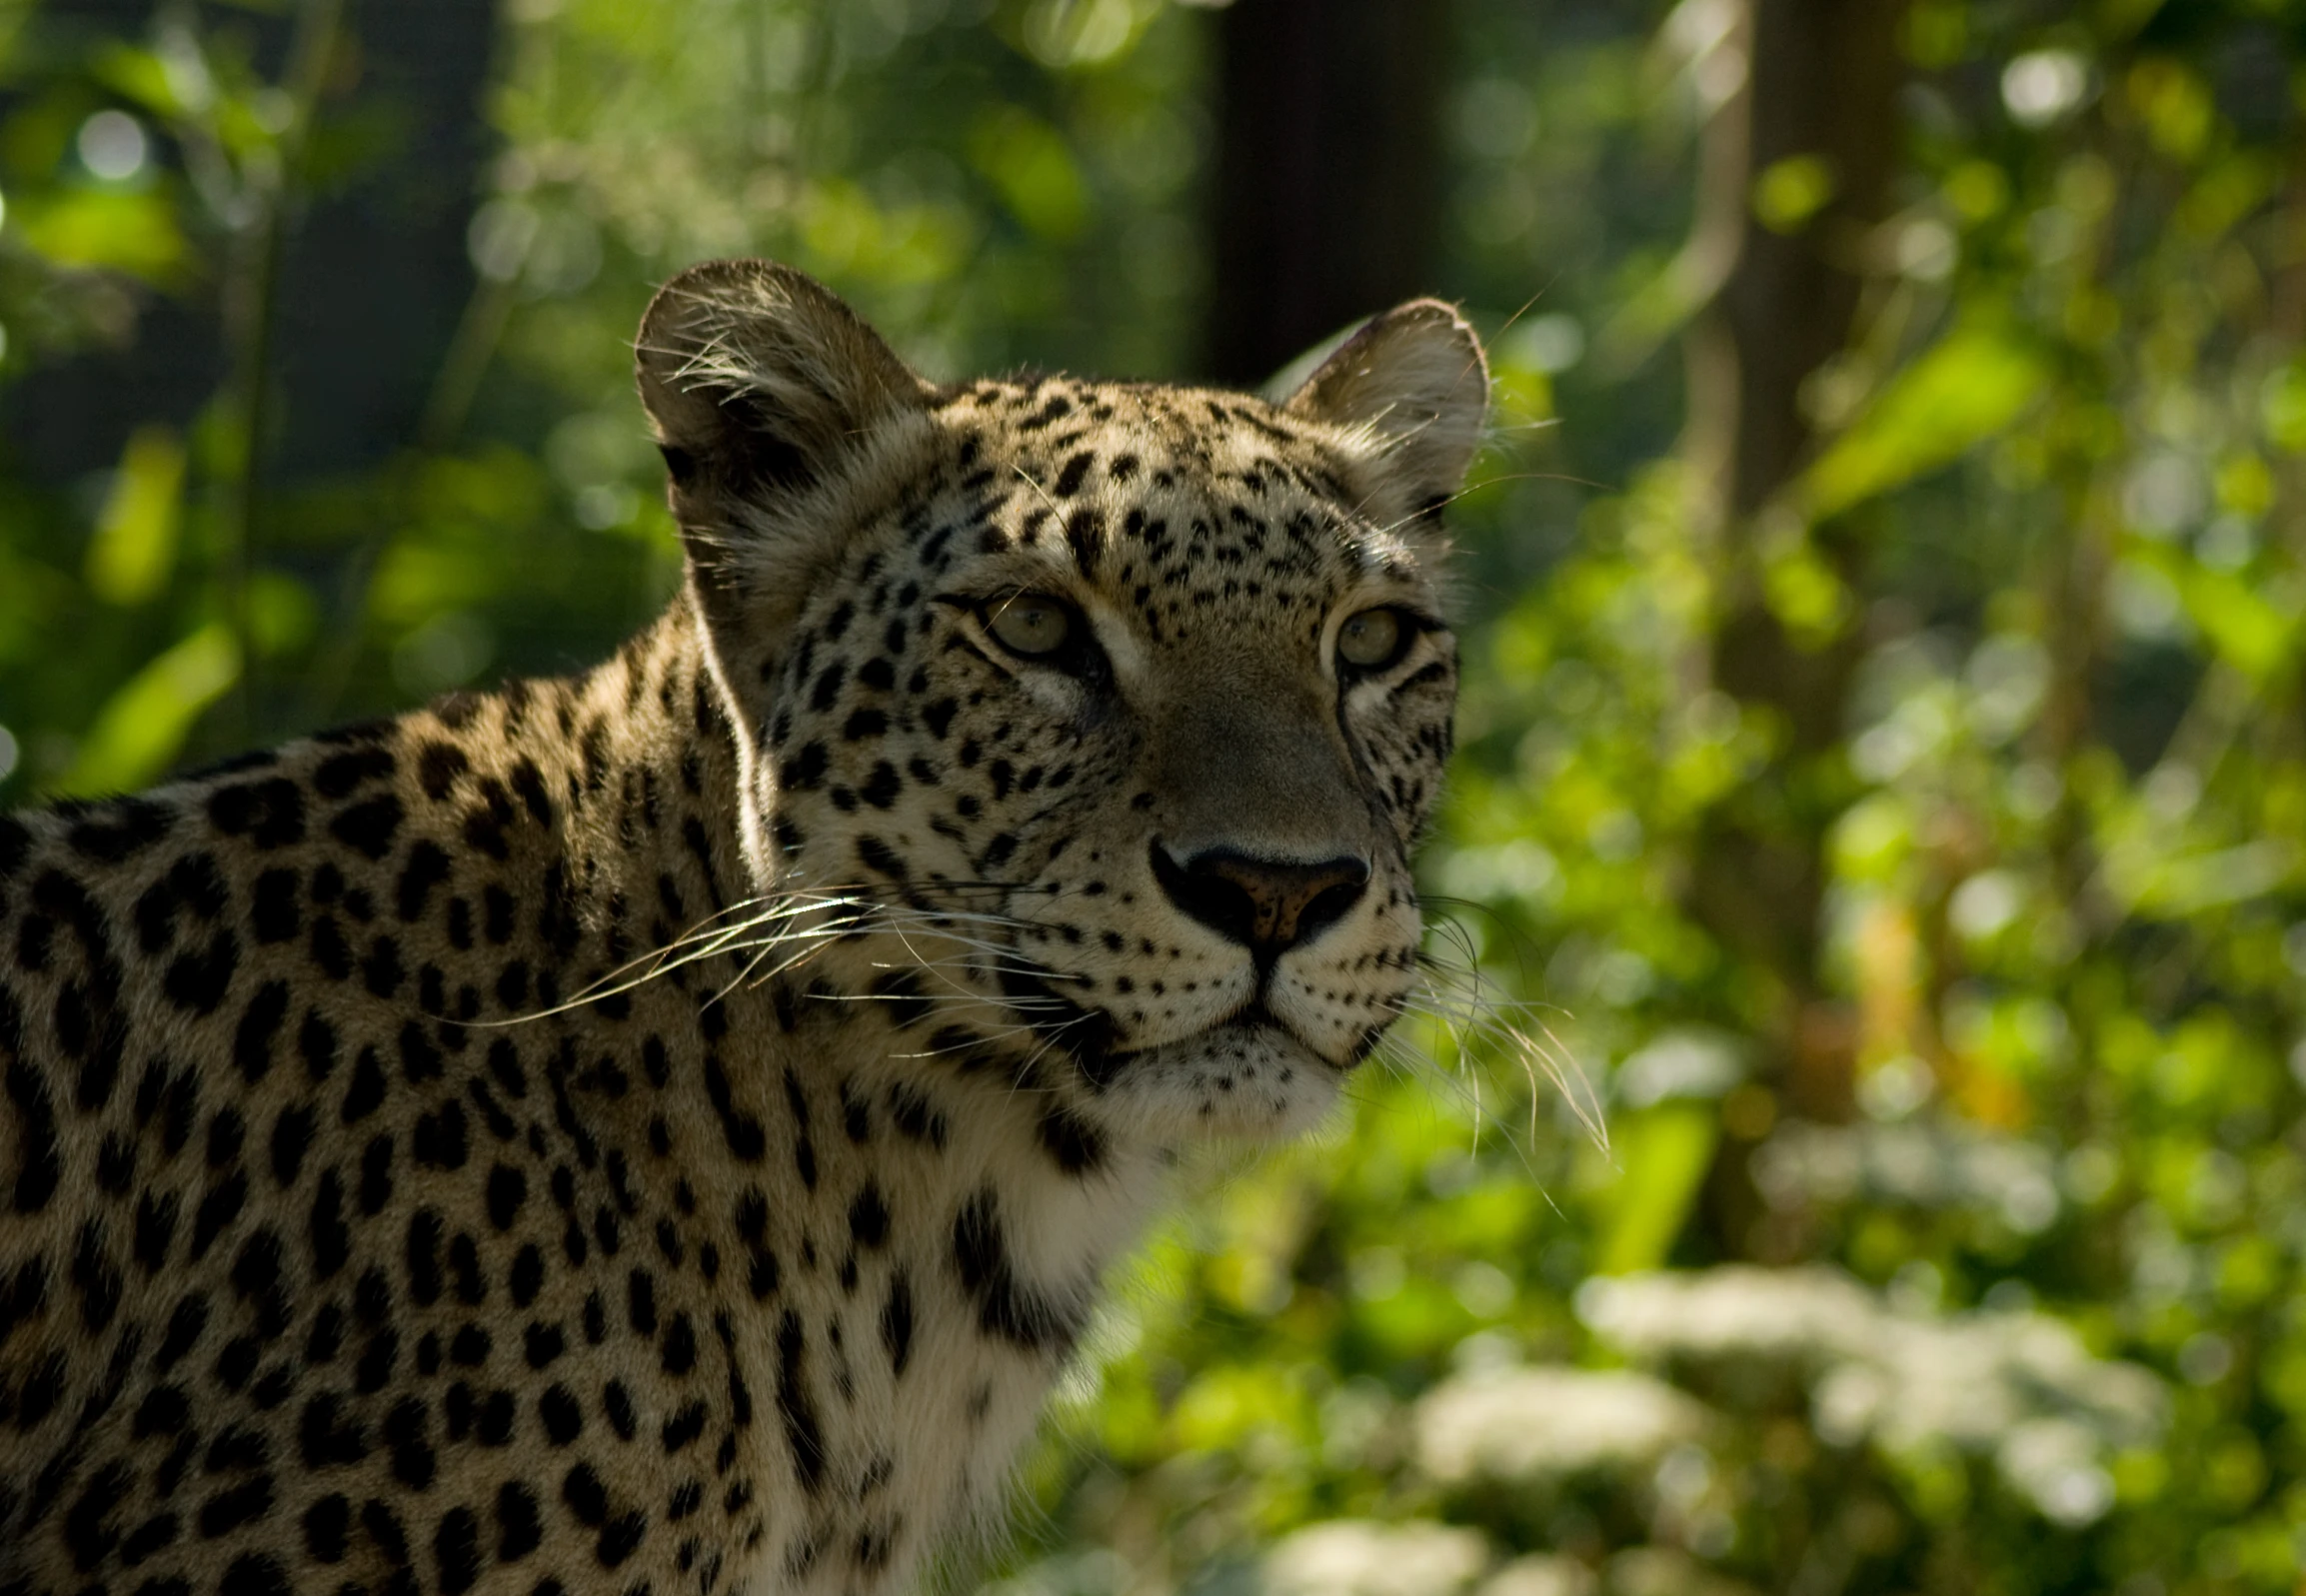 the large leopard is standing alone in the forest